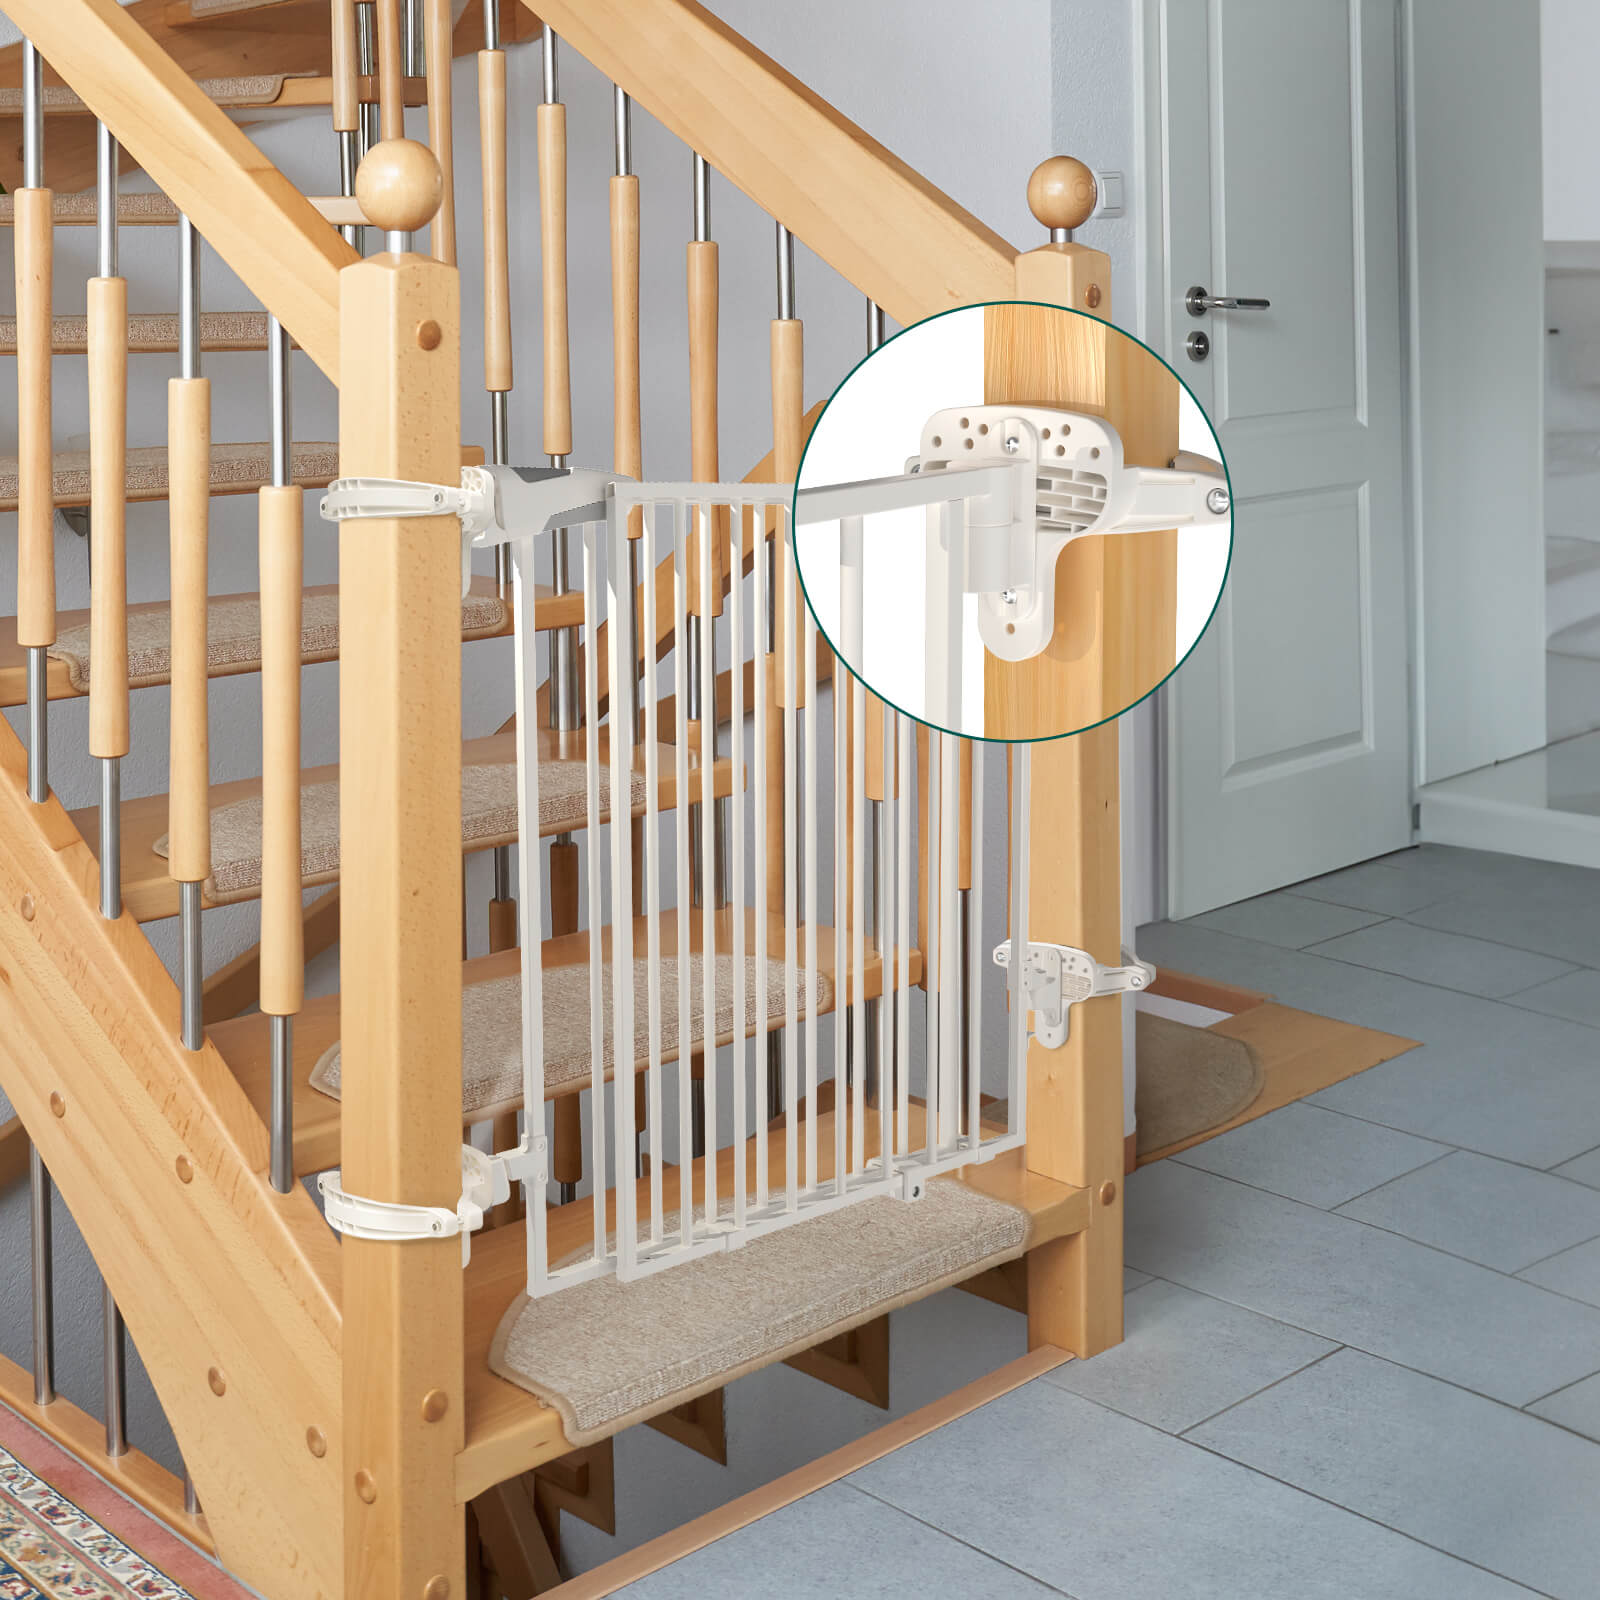 Babelio Baby Gate Mounting Kit - Fits 2.5-3.5" Square/Round Banisters, Same Upper/Lower Sides